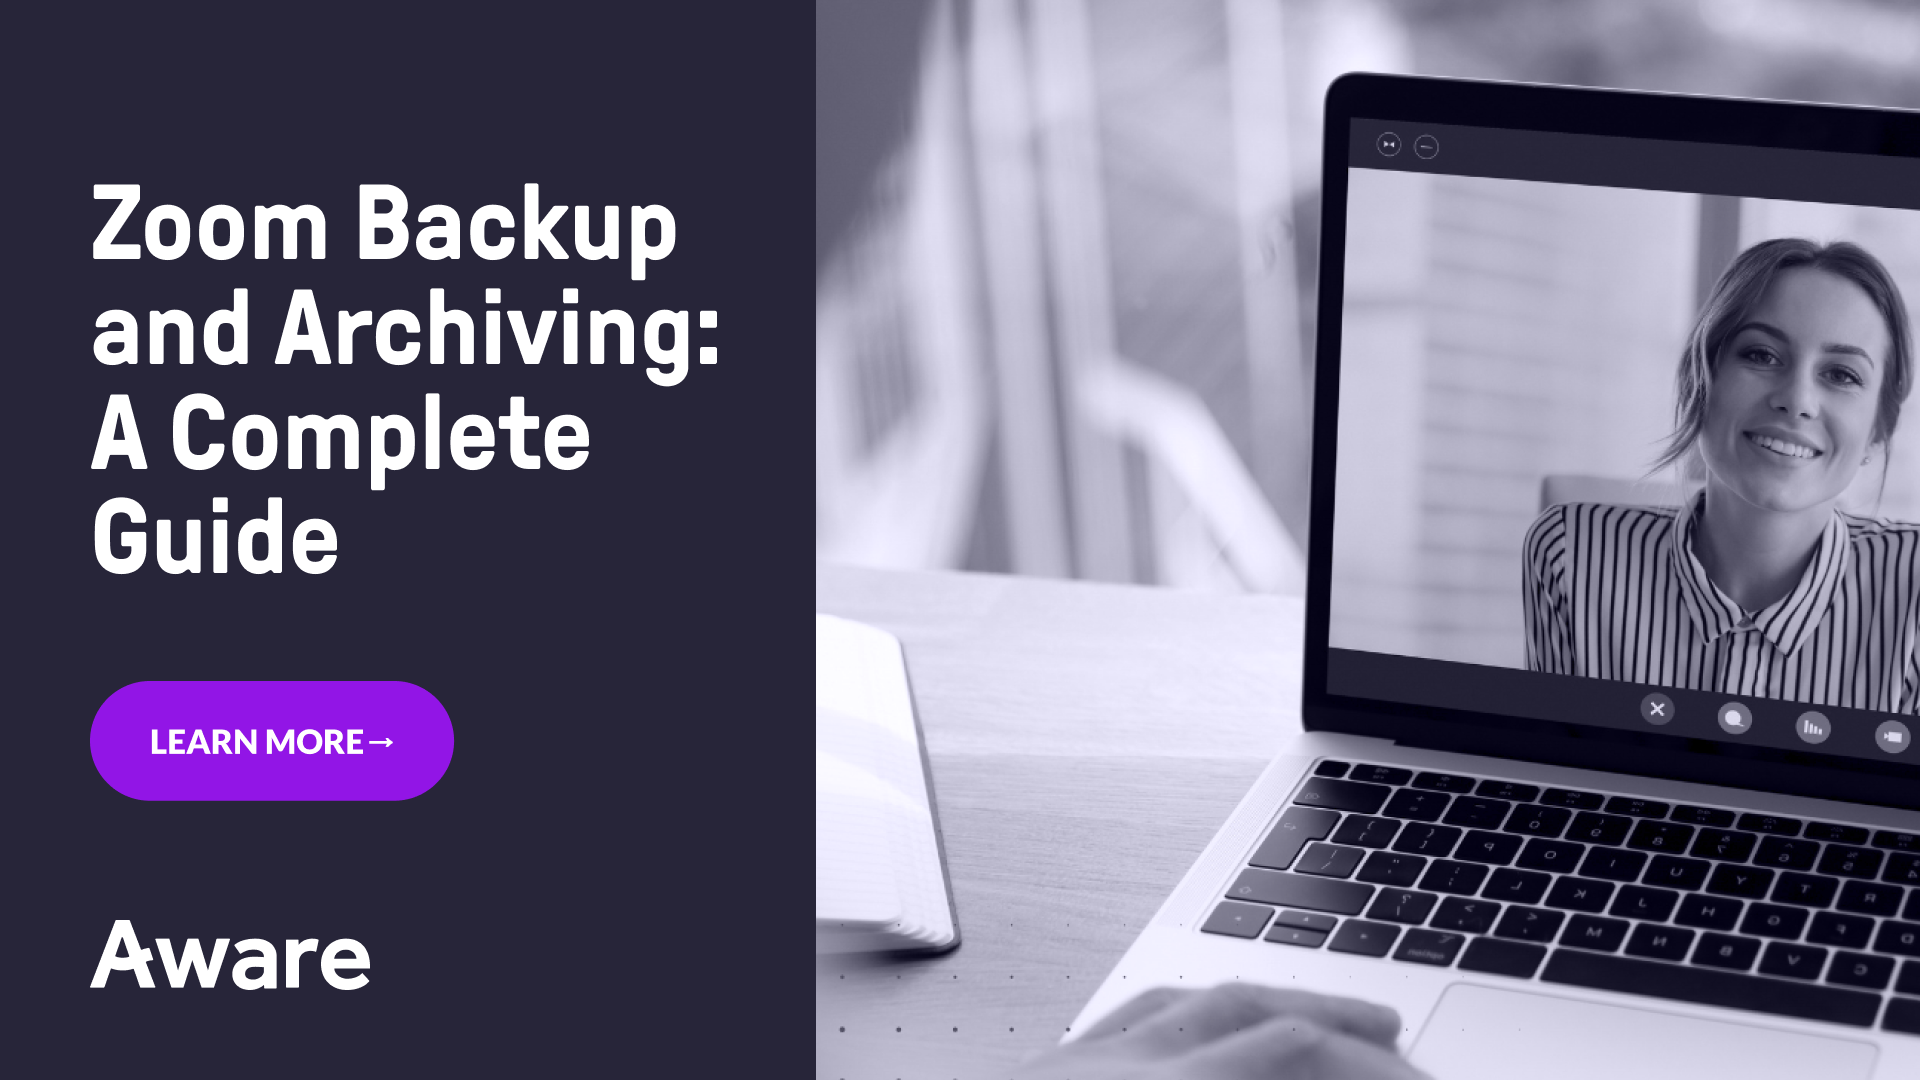 Zoom Backup and Archiving: A Complete Guide